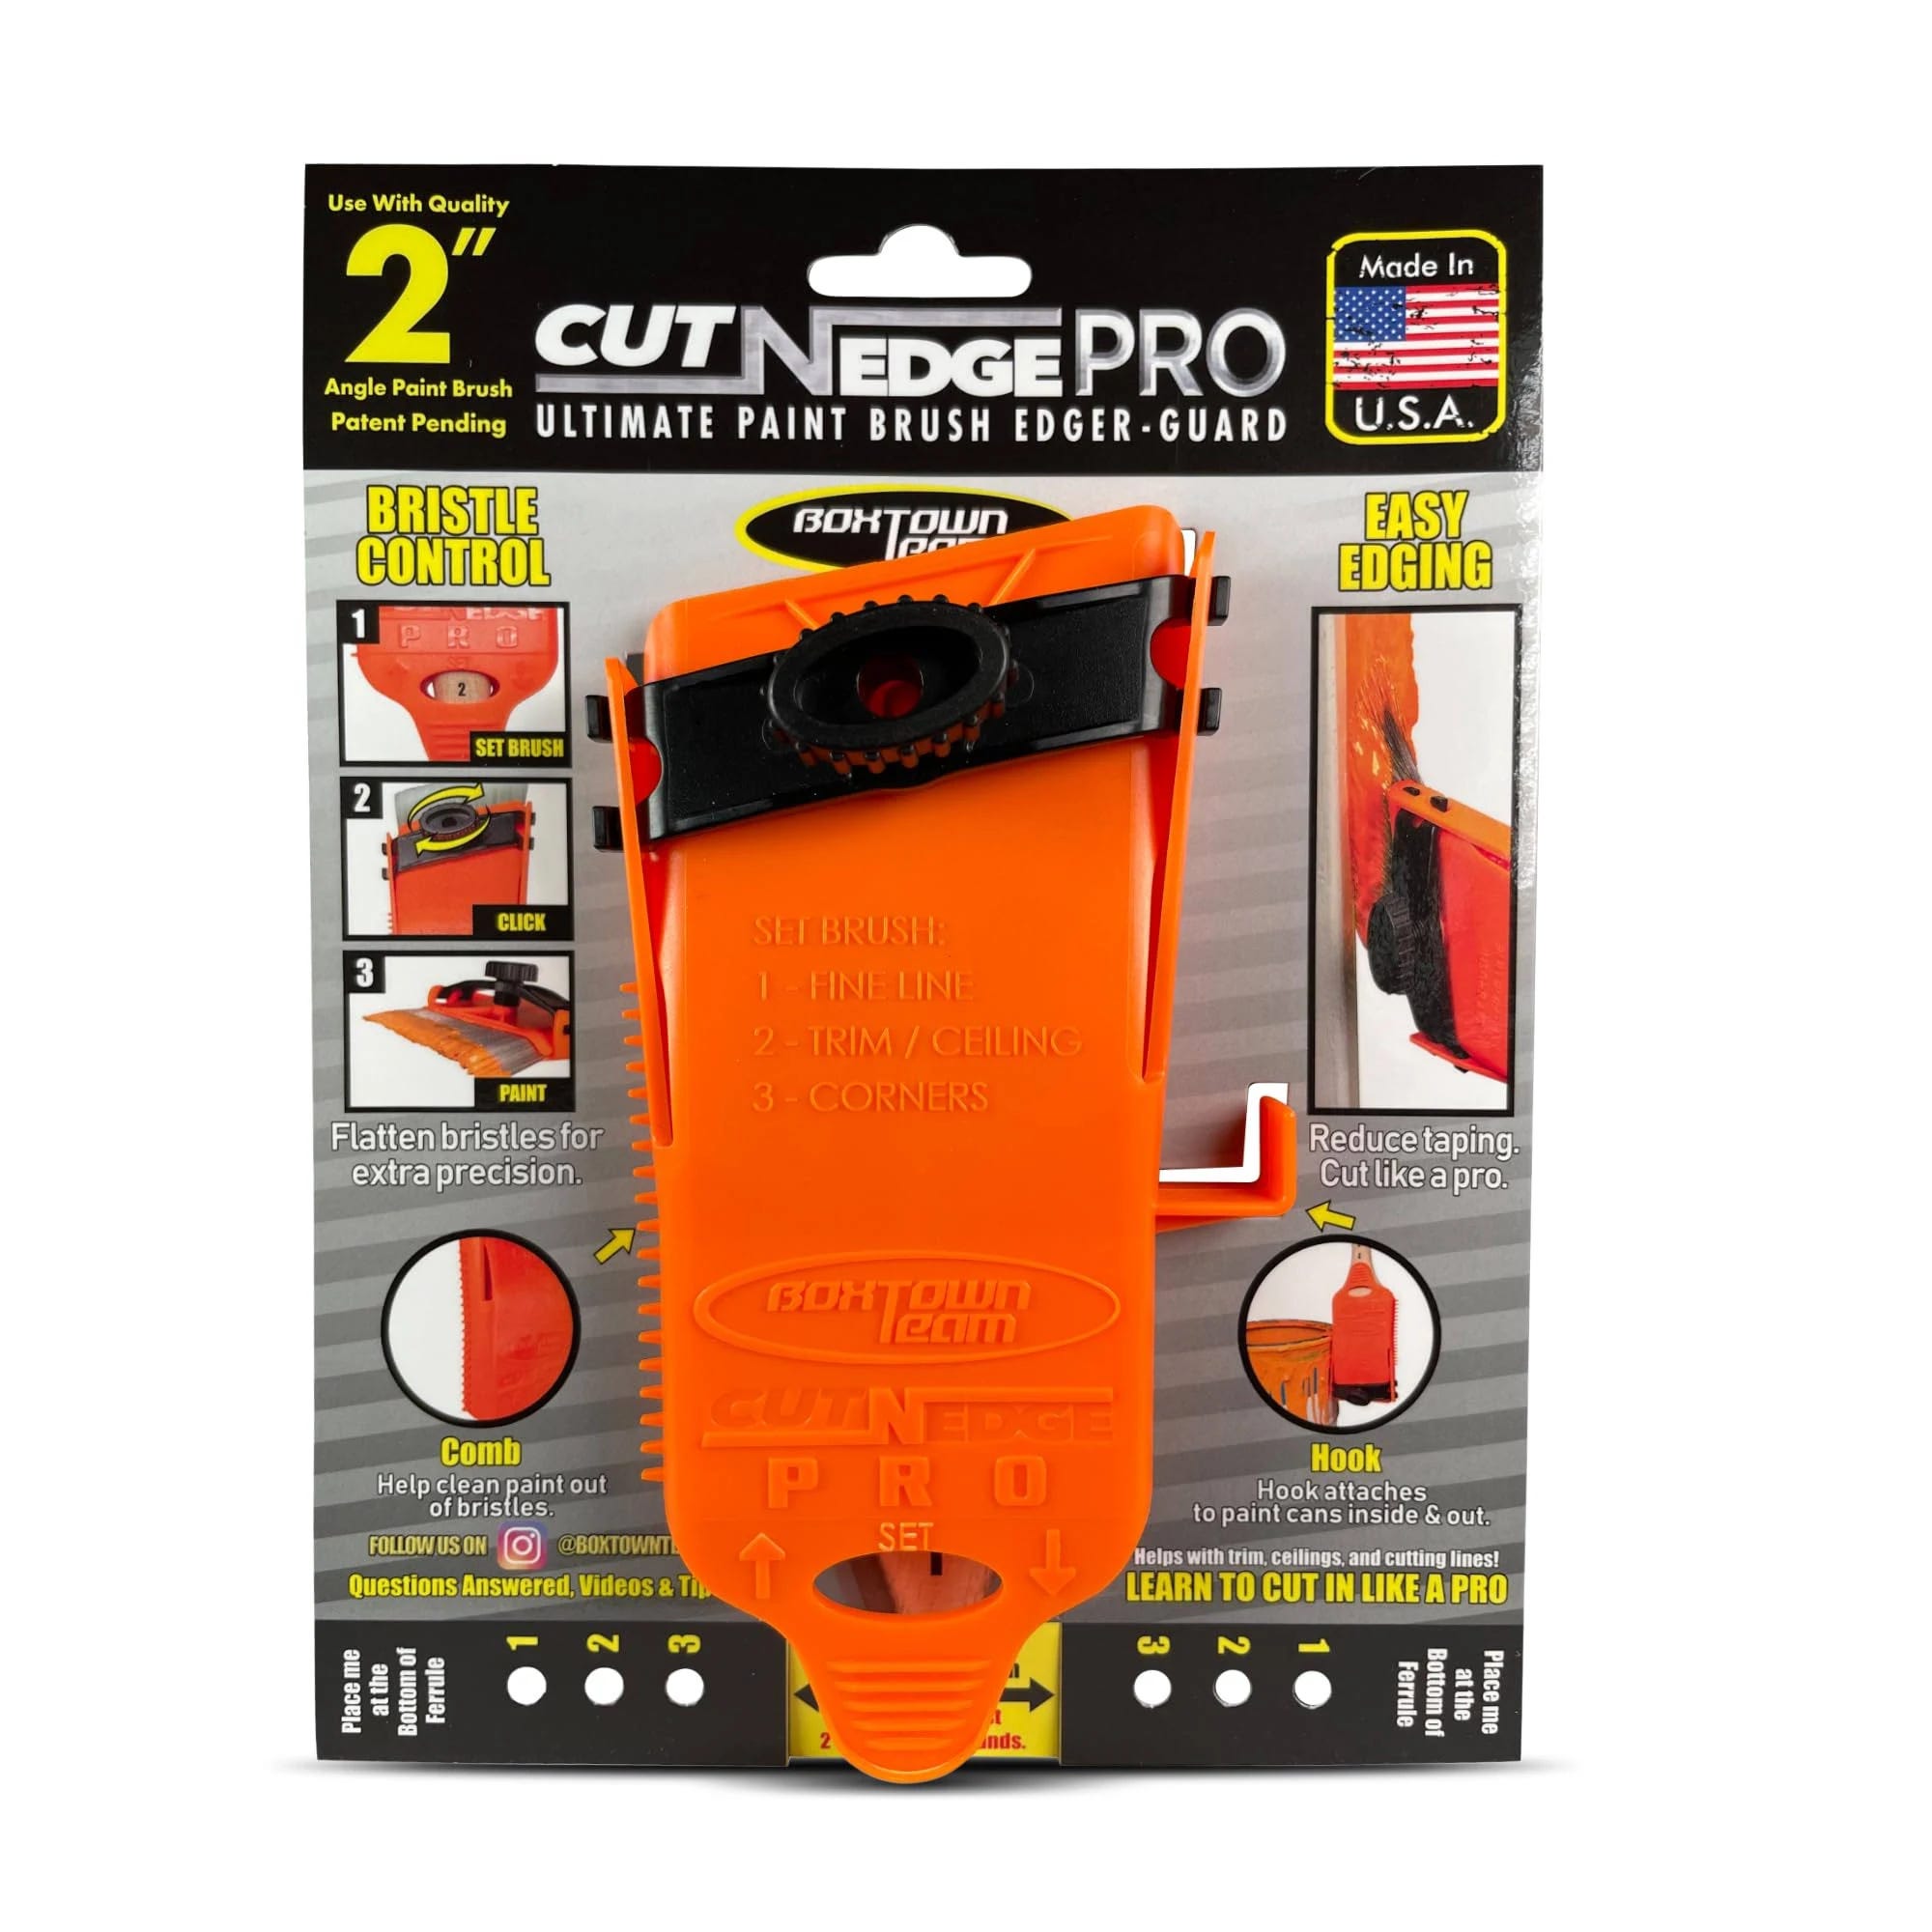 Pro Upgrade: Innovative Paint Edger Tool for Precision Edging and Clean Brush Storage | Image